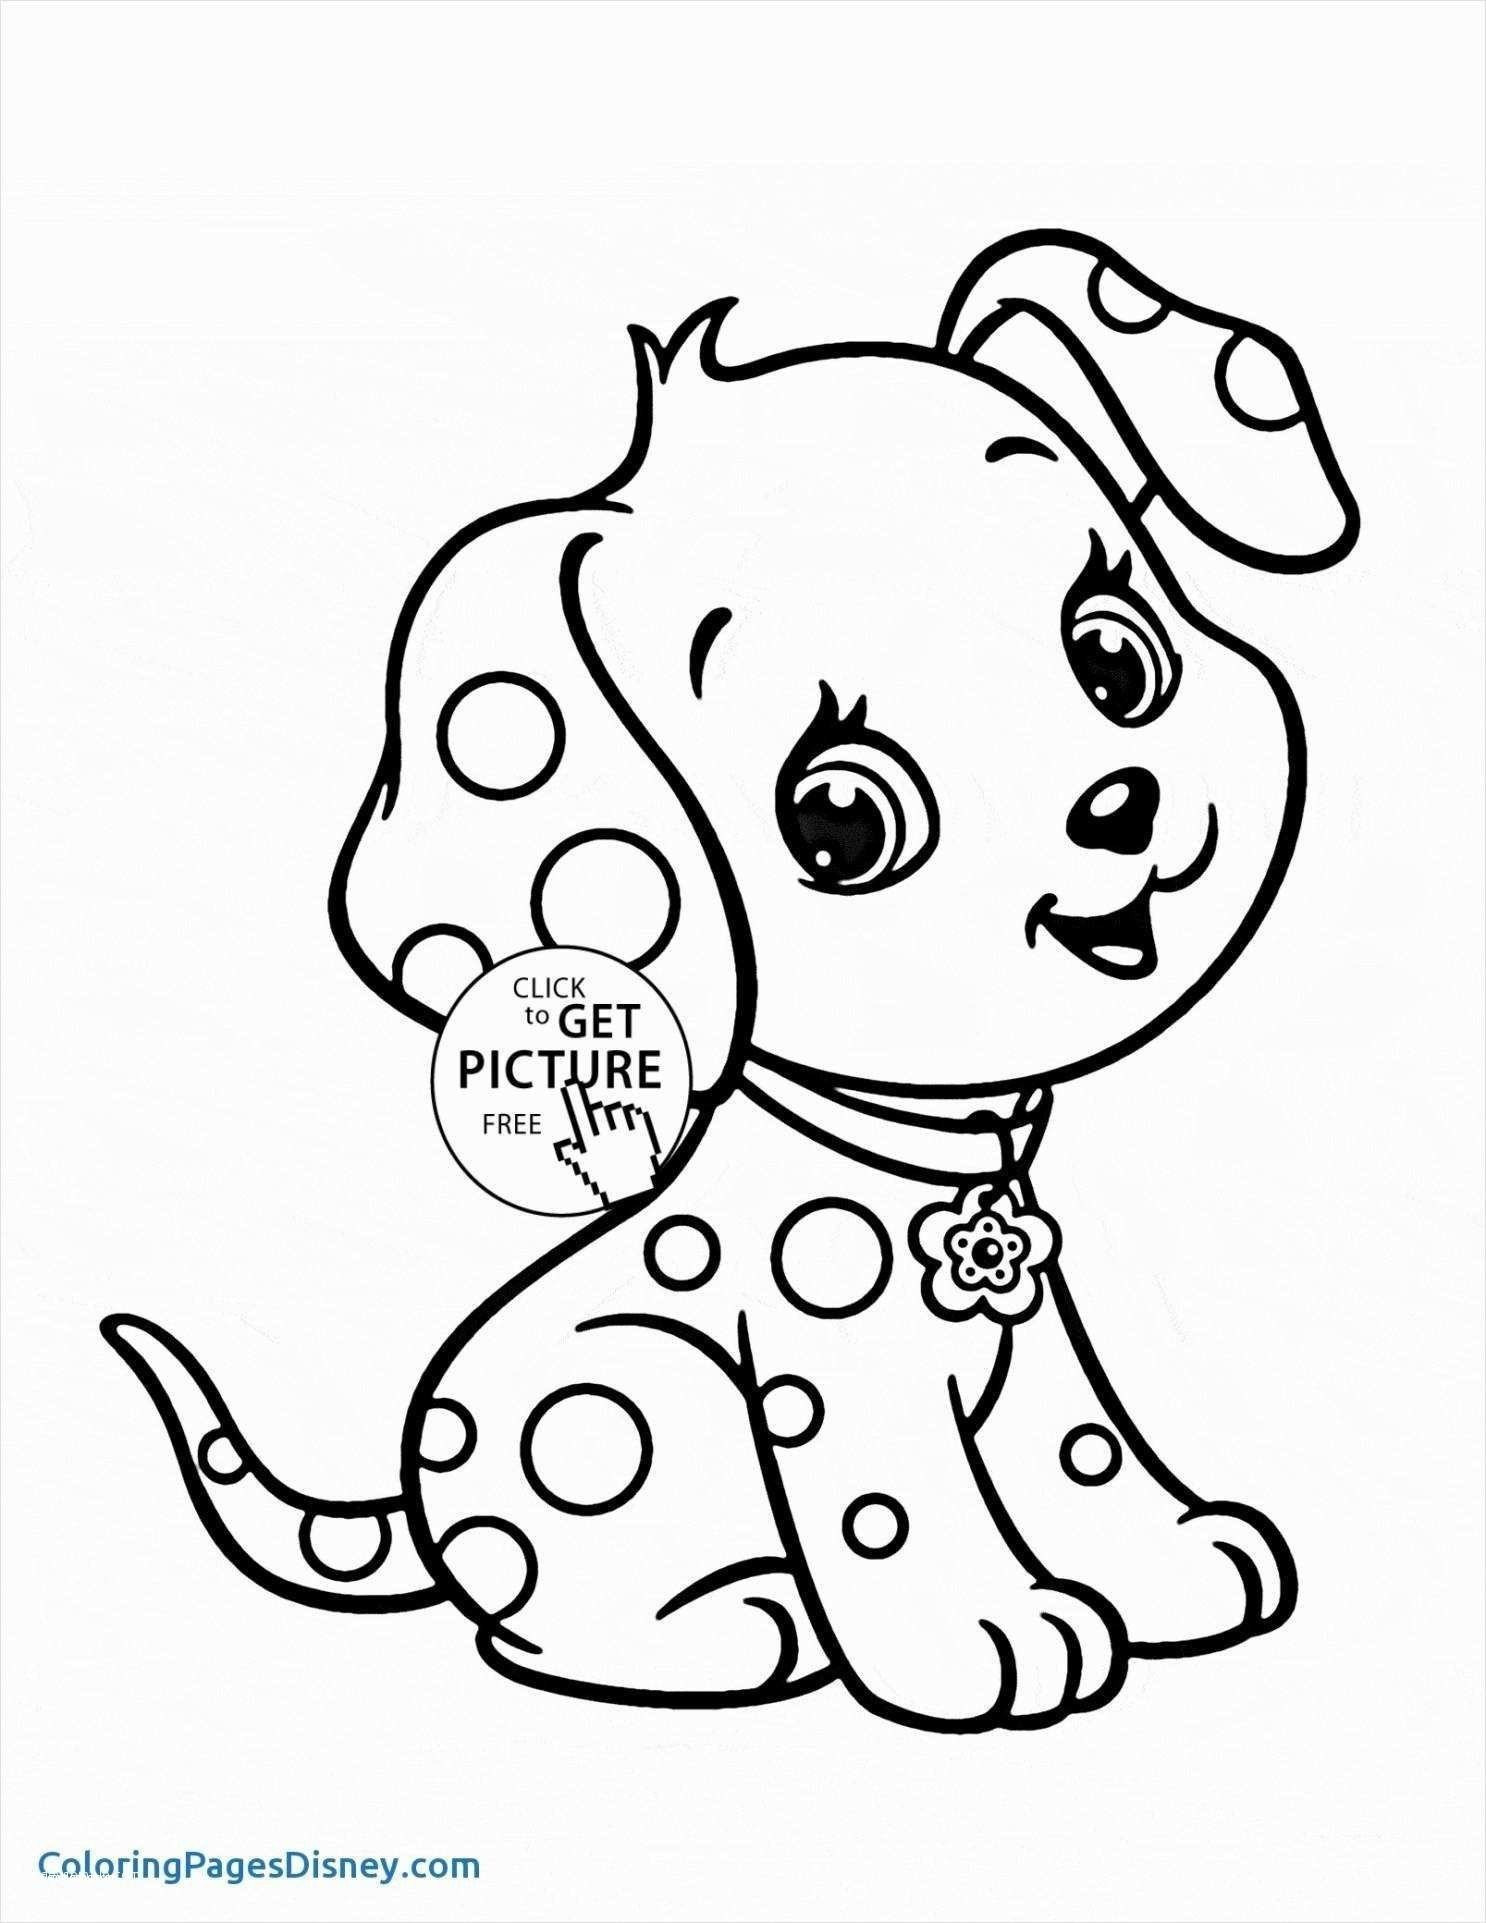 Personalized Coloring Books For Kids
 58 Extraordinary Personalized Coloring Sheets Image